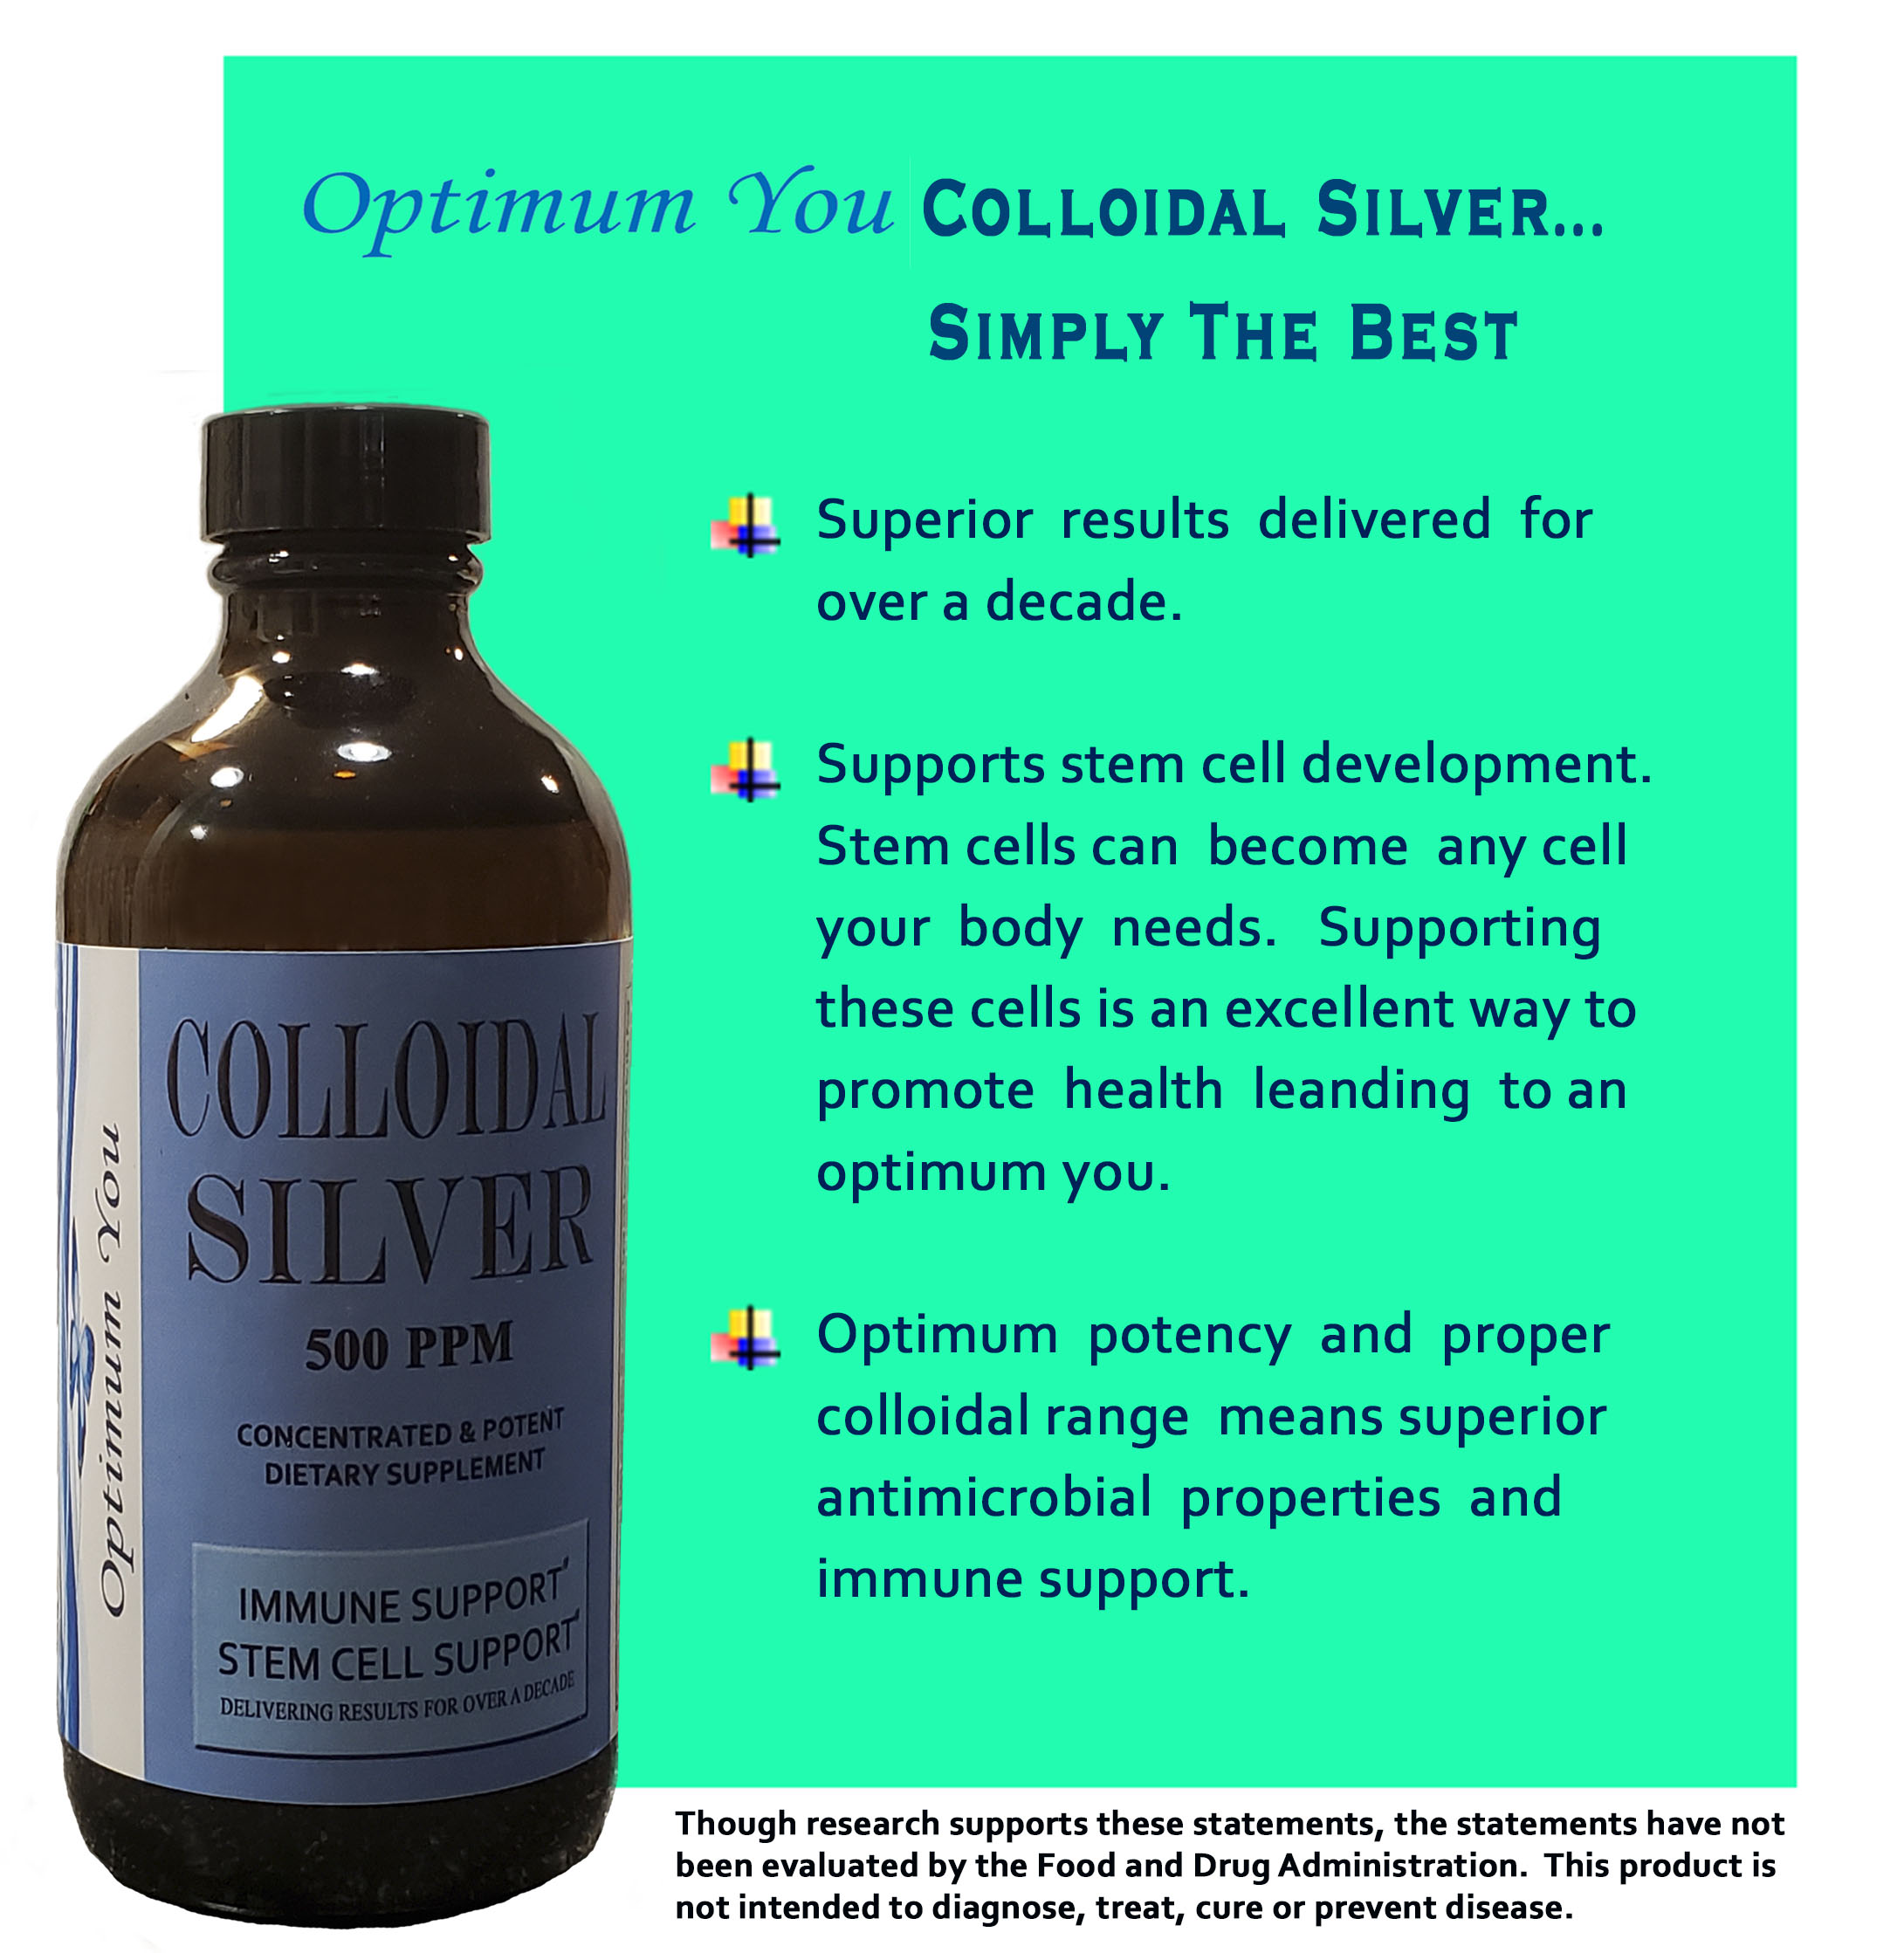 Optimum You Colloidal Silver...Simply The Best